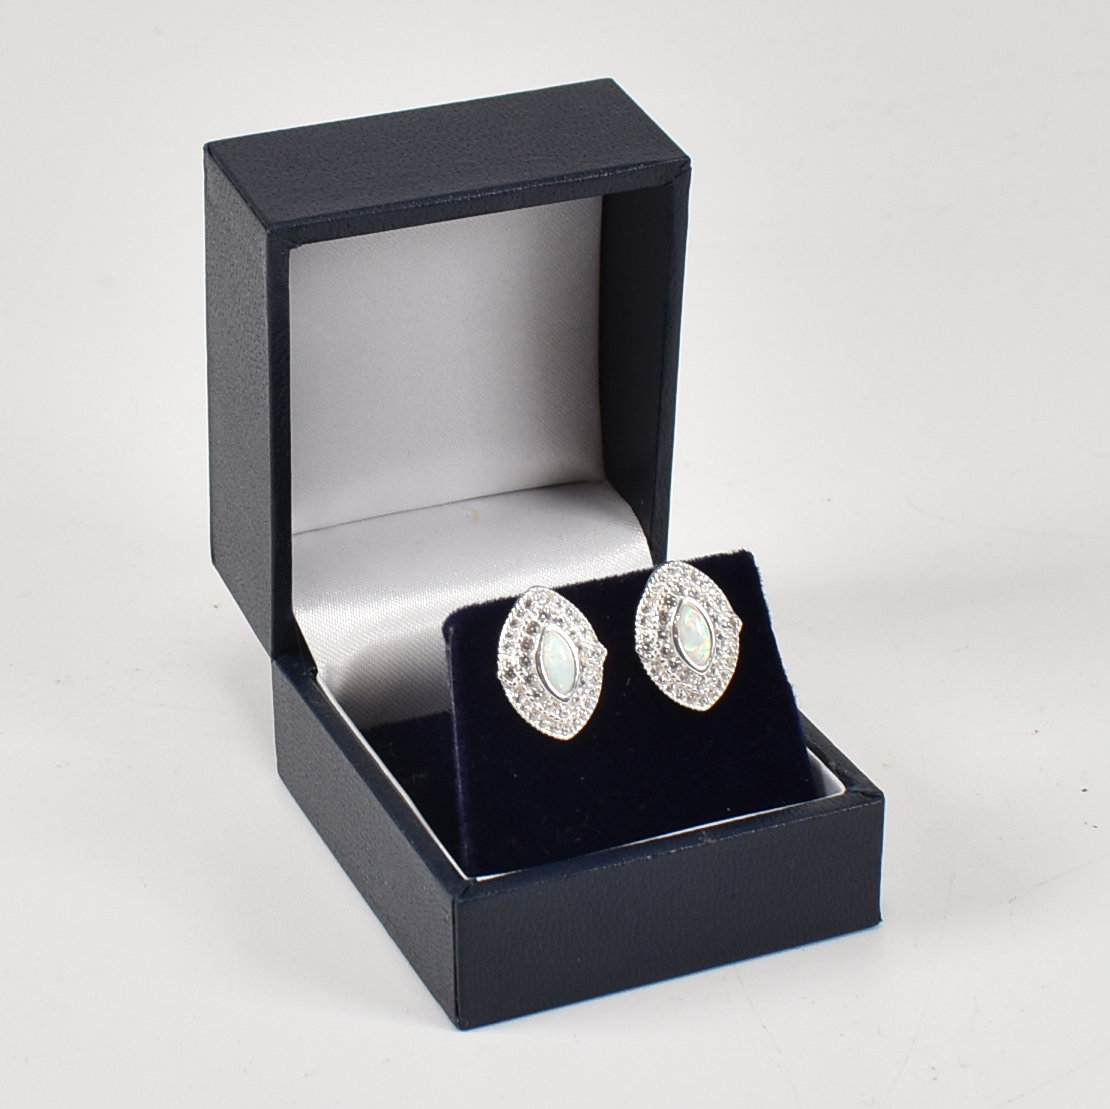 PAIR OF CONTEMPORARY CZ & OPALITE PANELLED STUD EARRINGS - Image 2 of 5